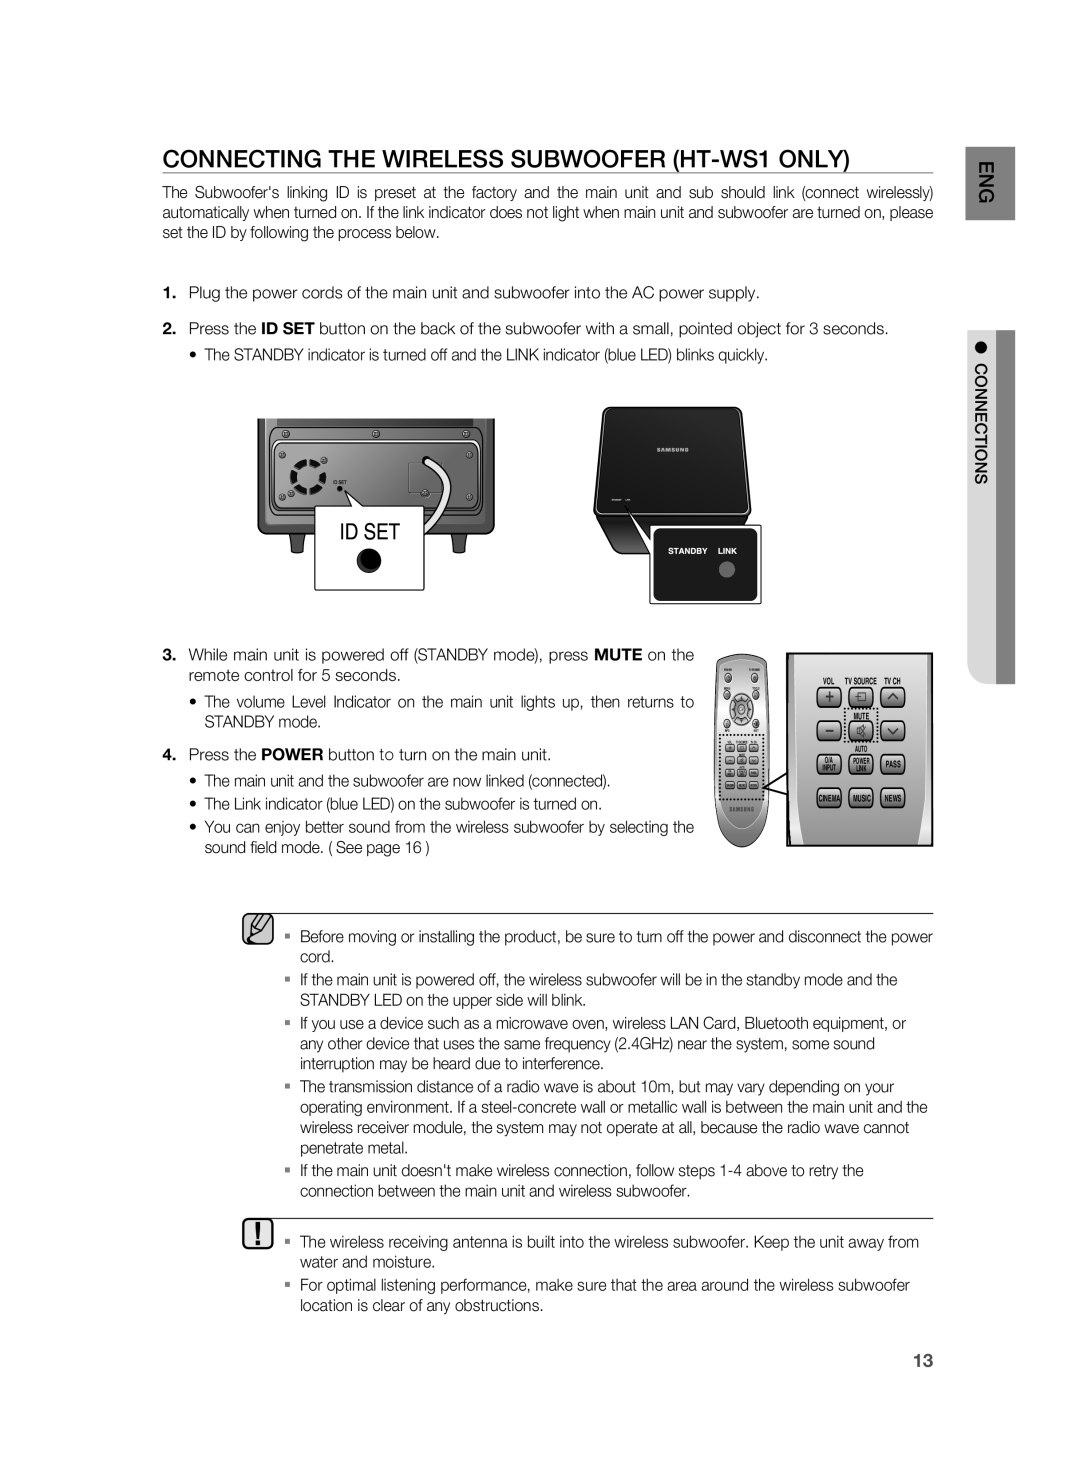 Samsung AH68-02184F user manual CONNECTING THE WIrElESS SUBWOOFEr HT-WS1only 